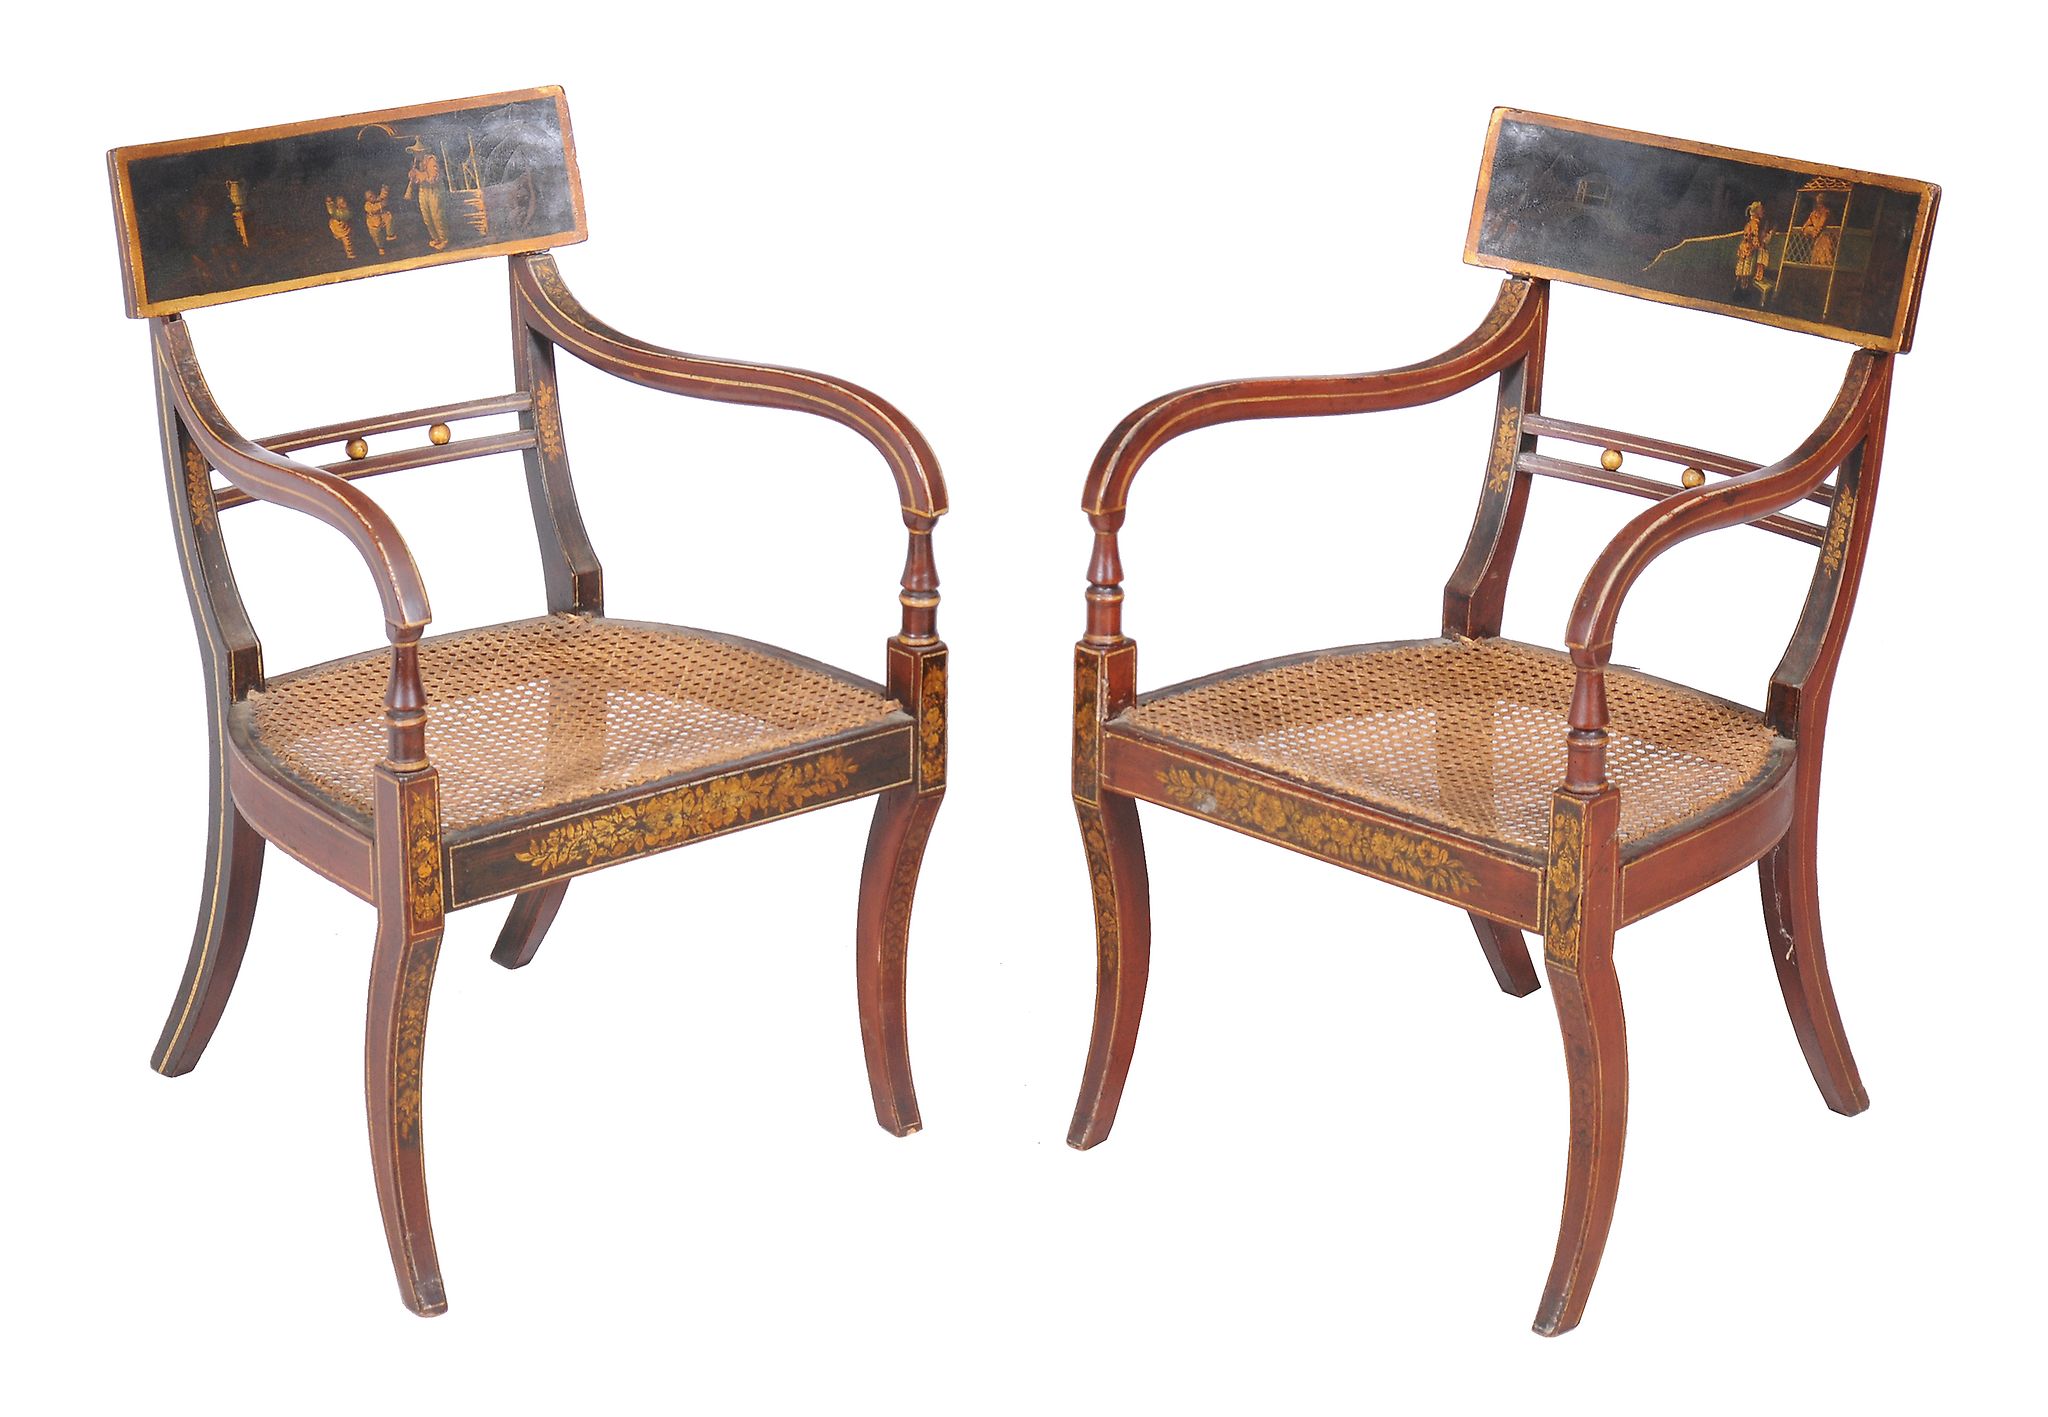 A pair of Regency japanned, red lacquered and gilt decorated armchairs , circa 1815, the bar backs